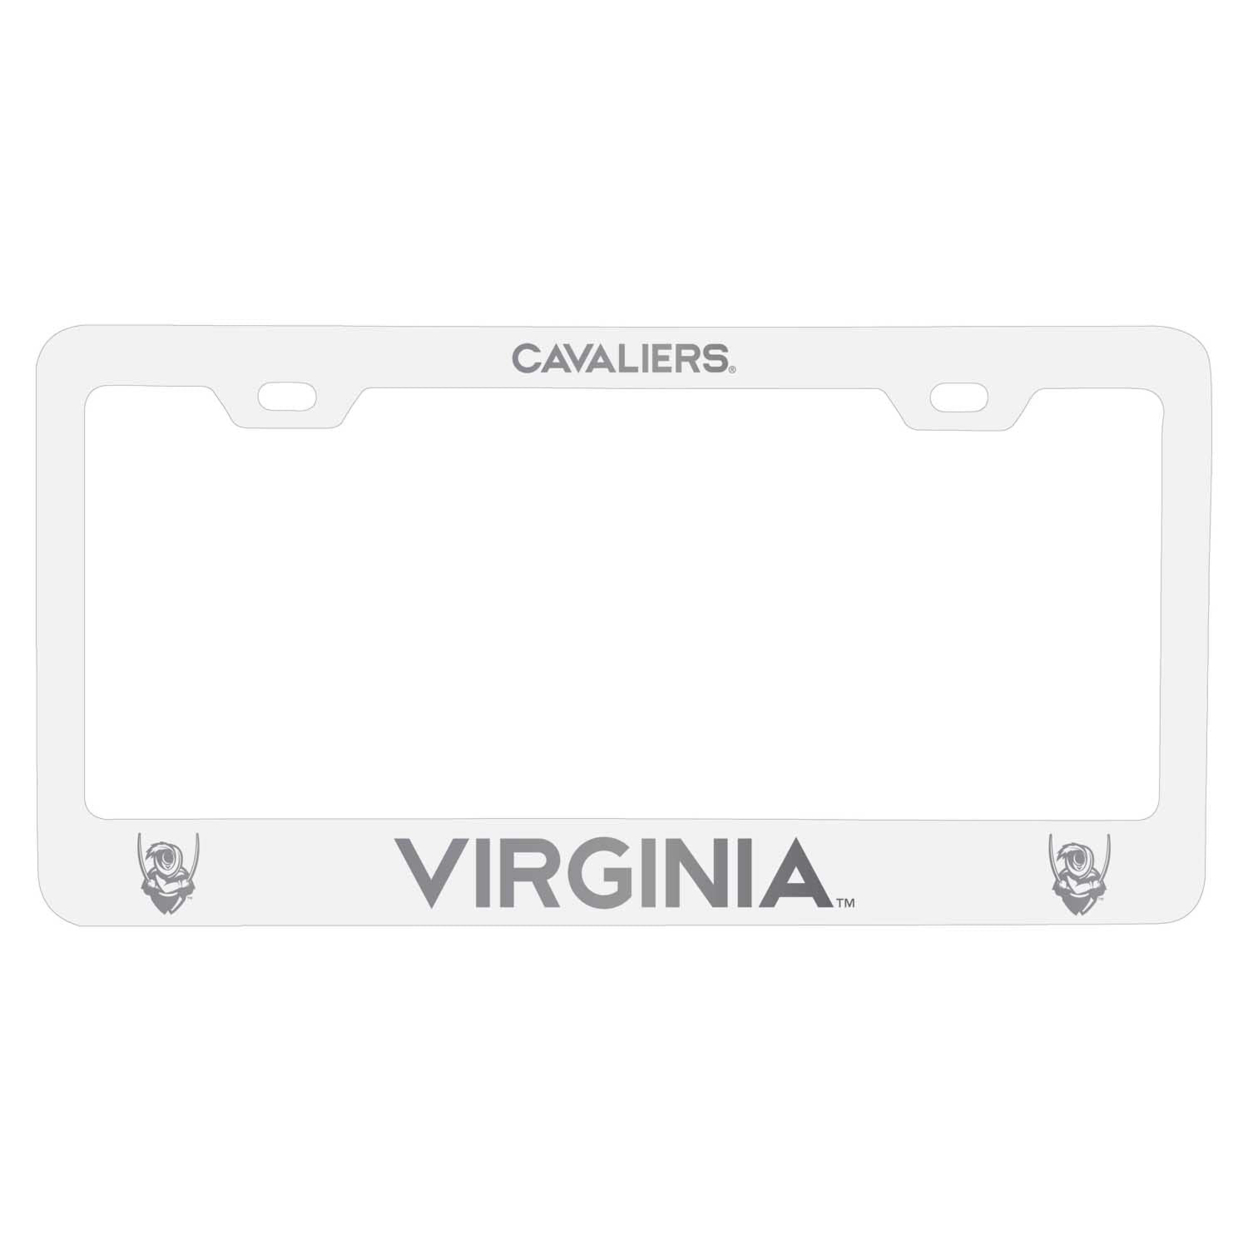 Virginia Cavaliers Laser Engraved Metal License Plate Frame - Choose Your Color - White